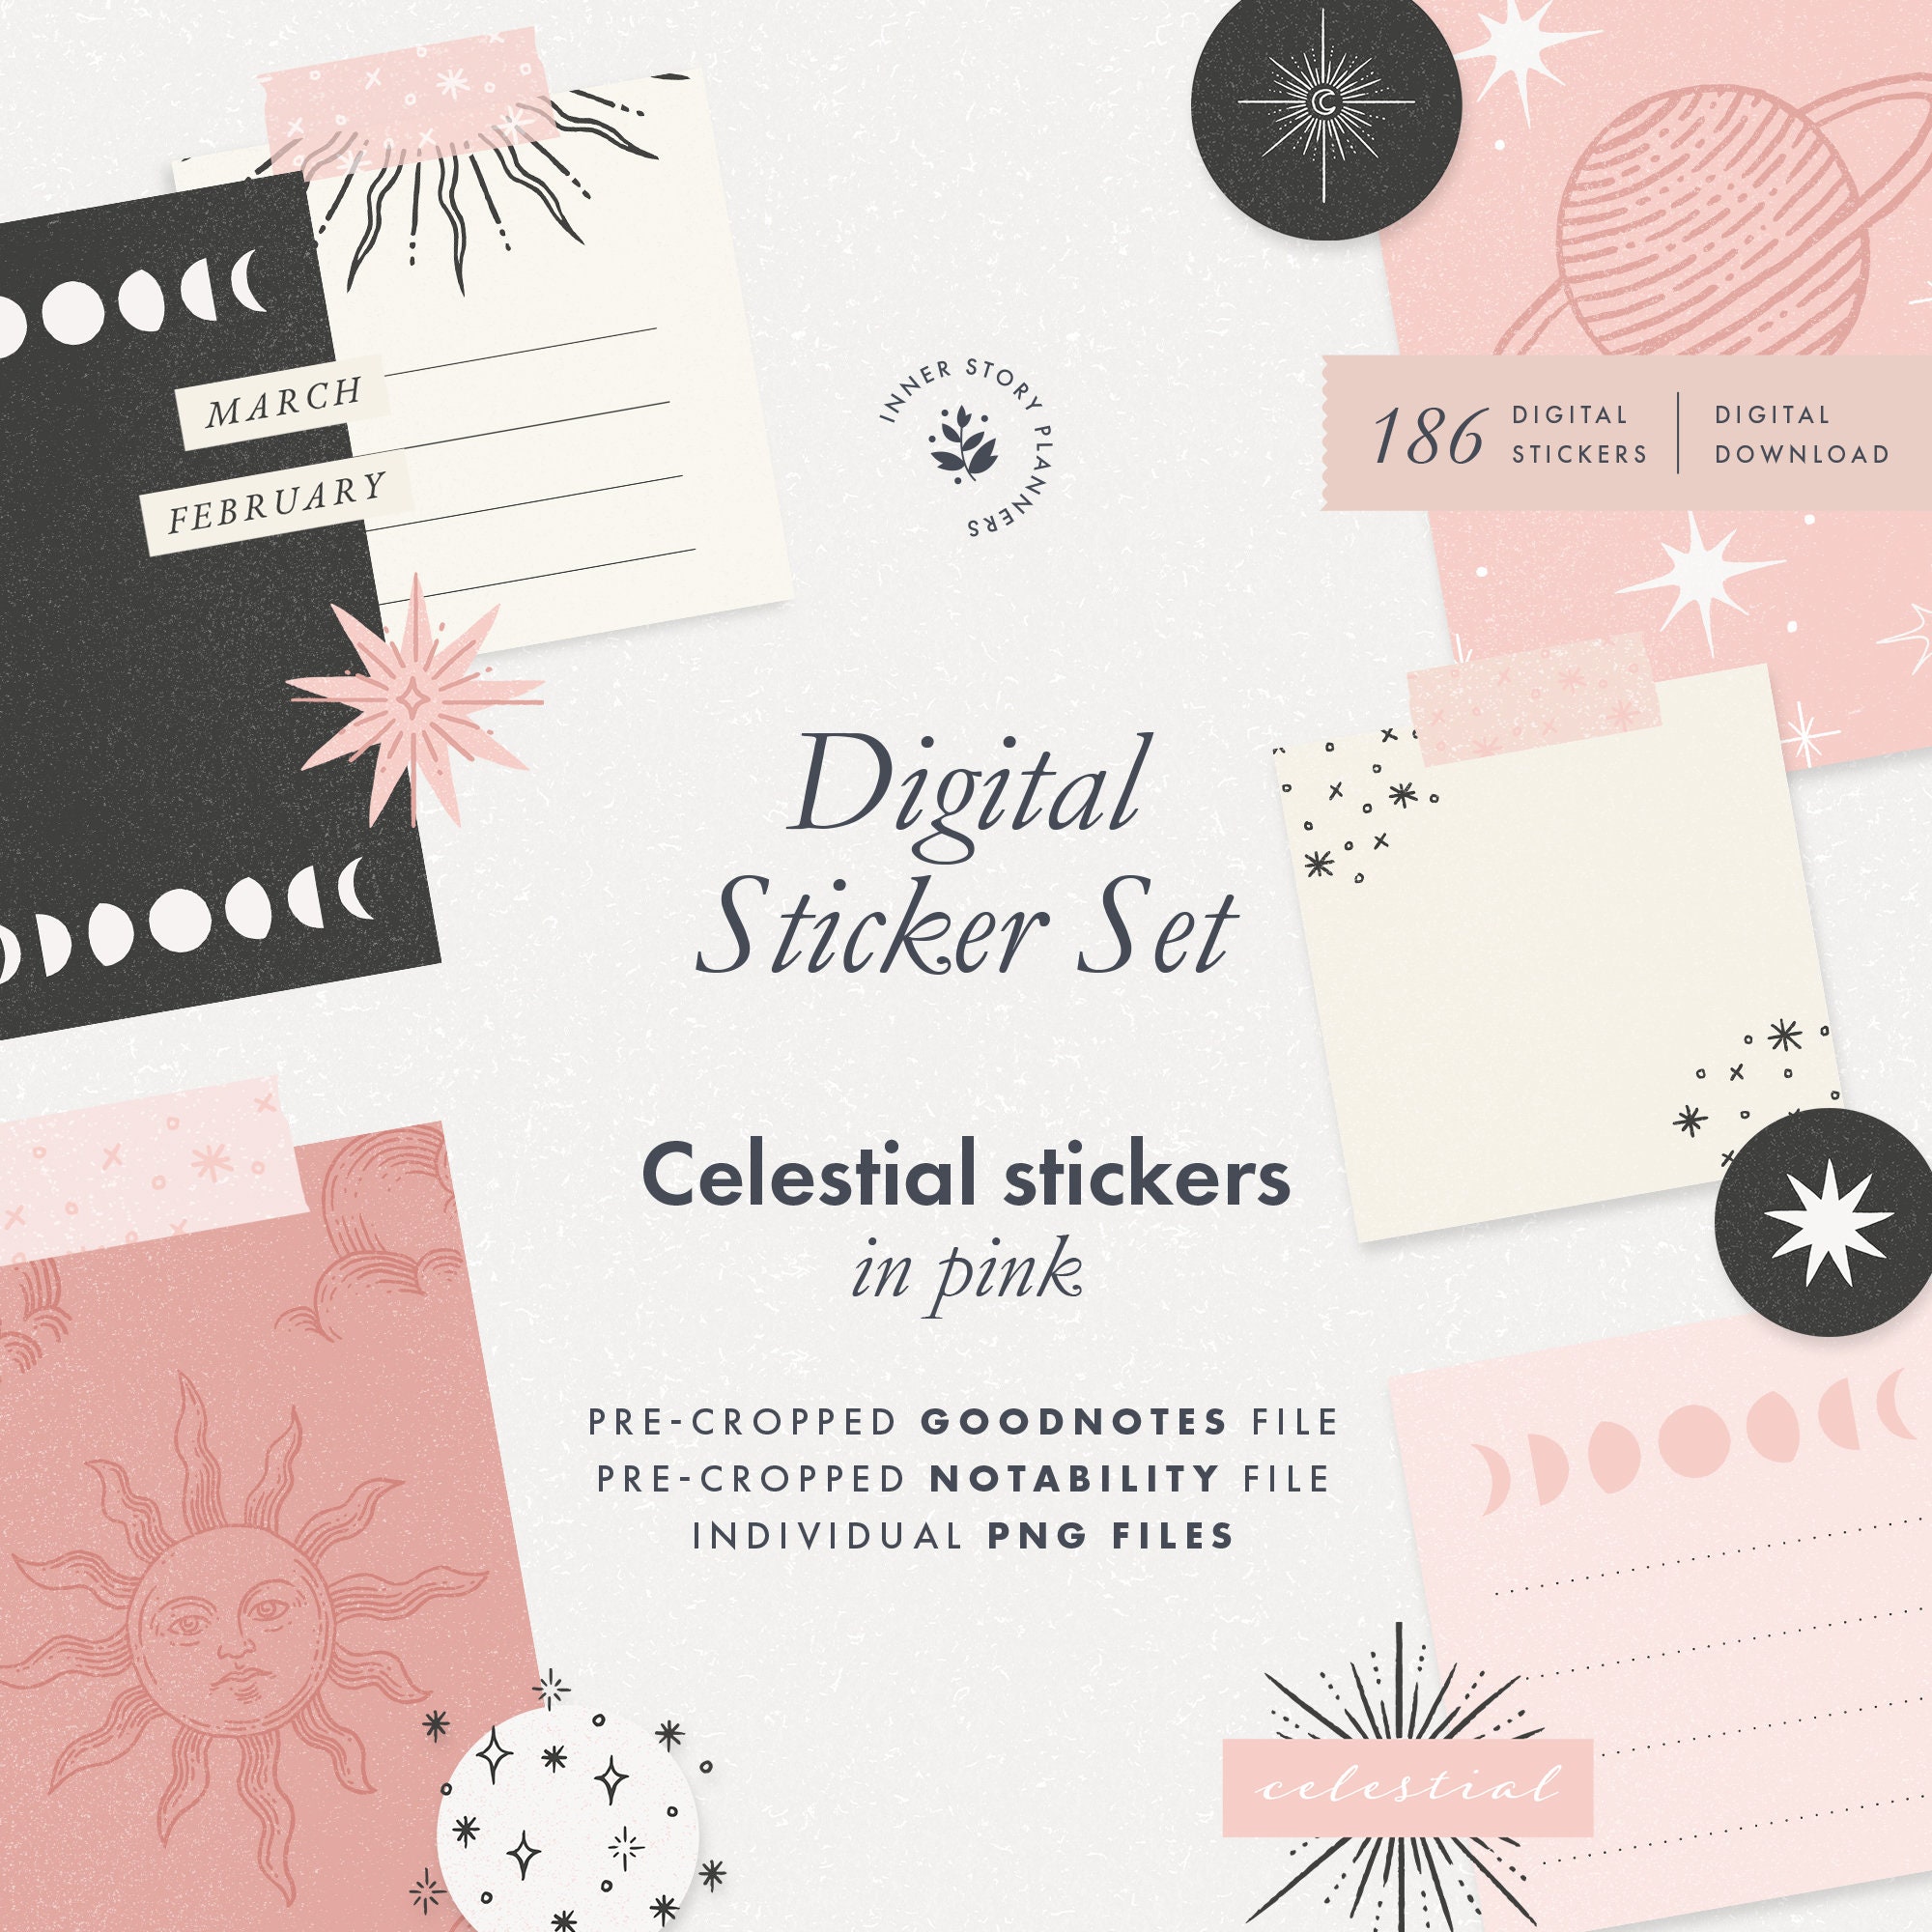 Stars and moon stickers Sticker for Sale by Aesthetics1kyye